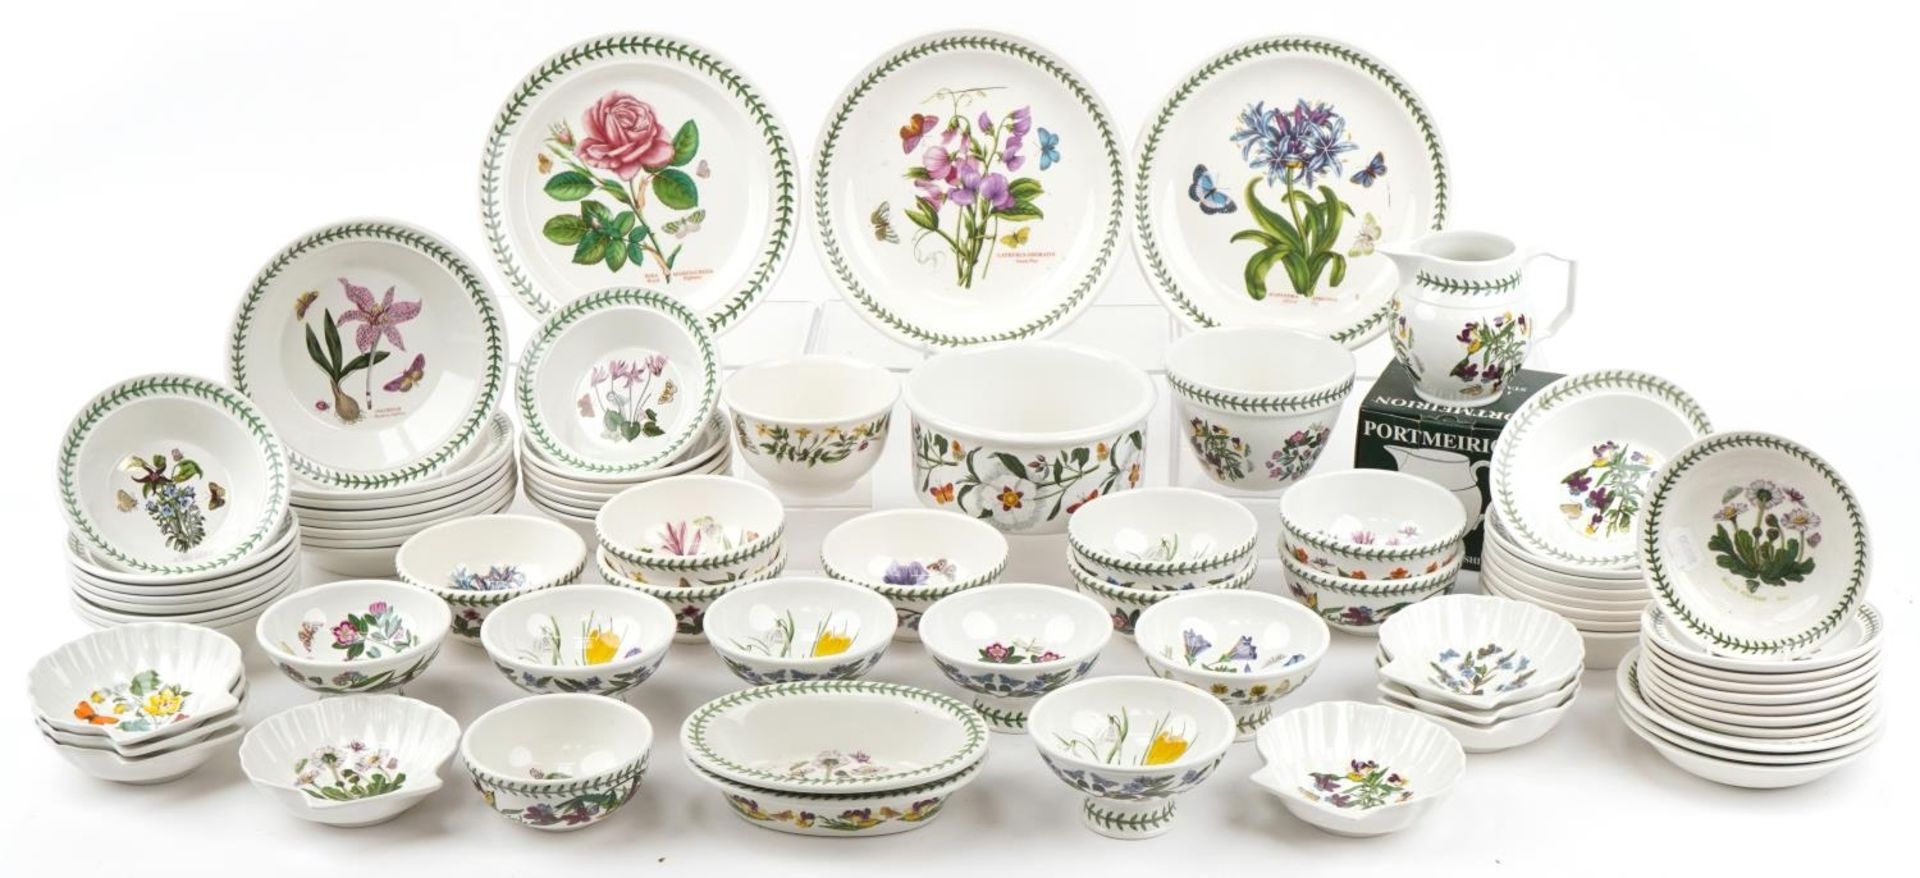 Large collection of Portmeirion Botanic Garden plates, bowls and dishes, the largest 27cm in